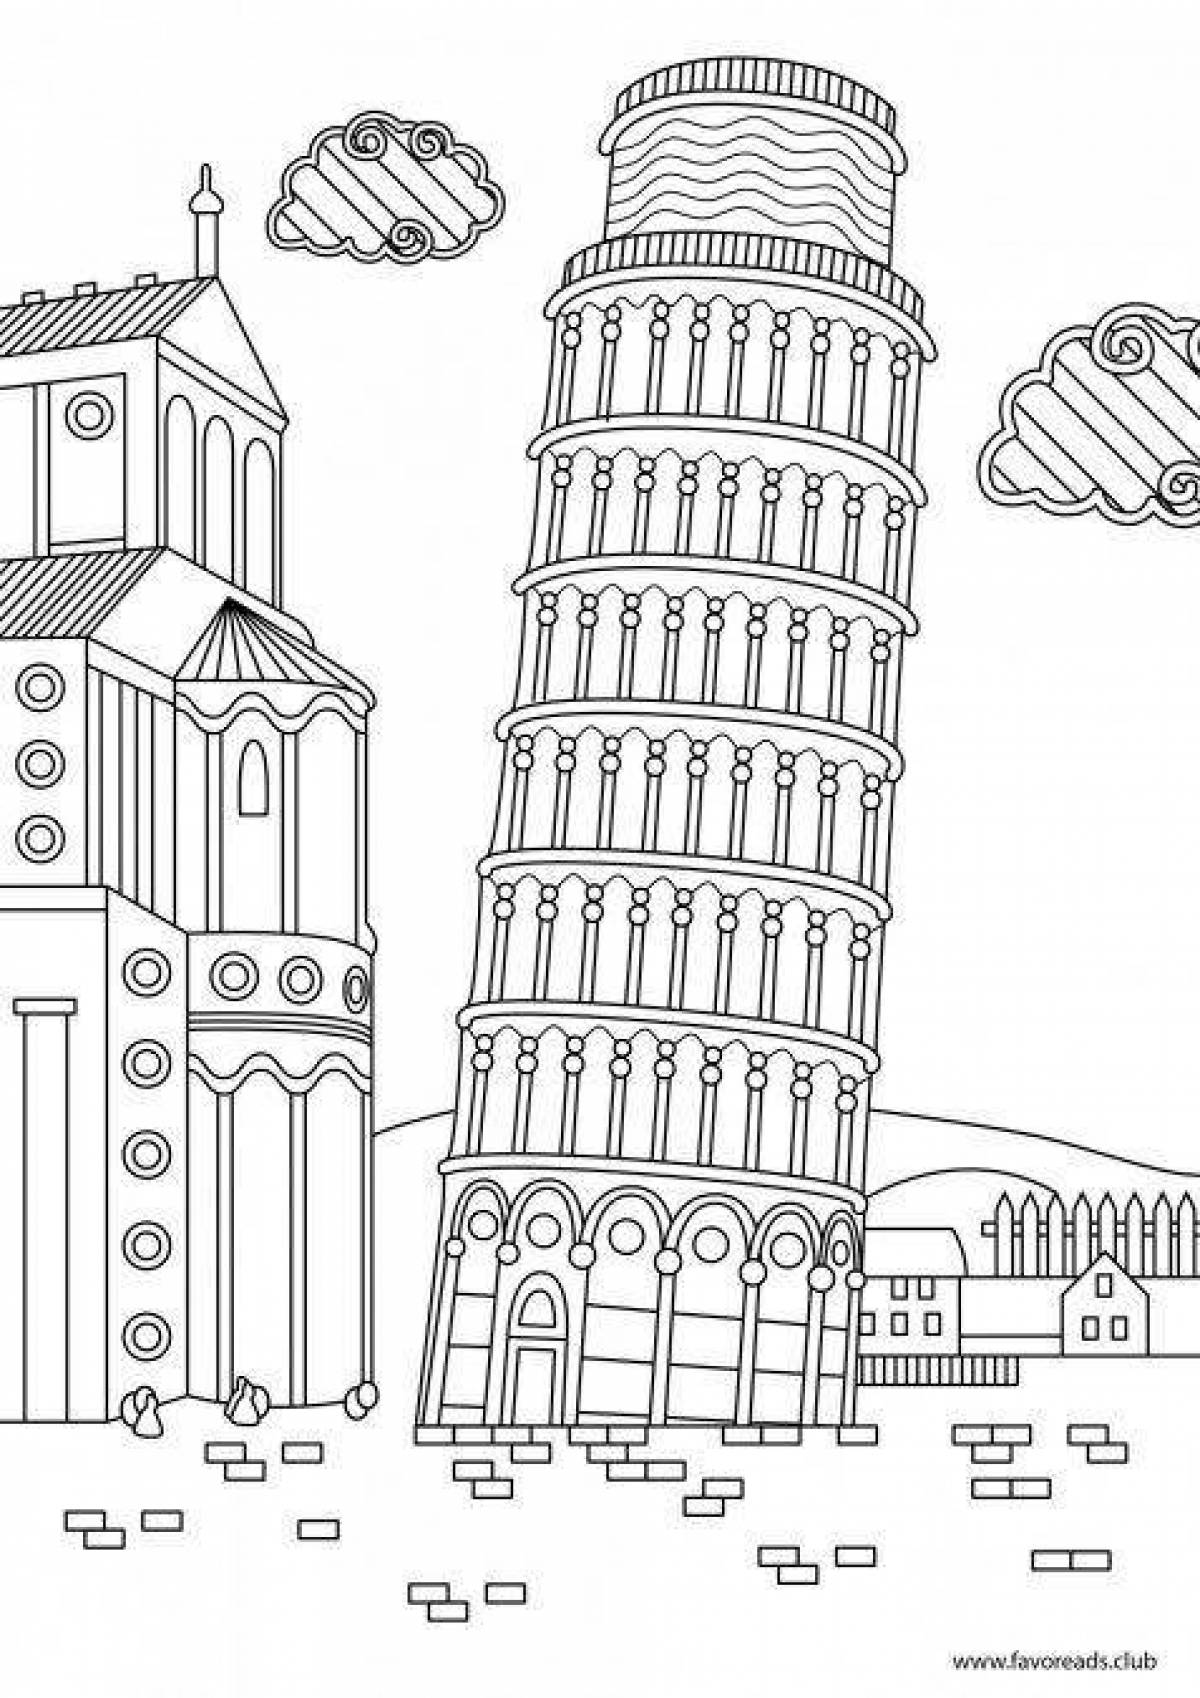 Colorful coloring of the Leaning Tower of Pisa